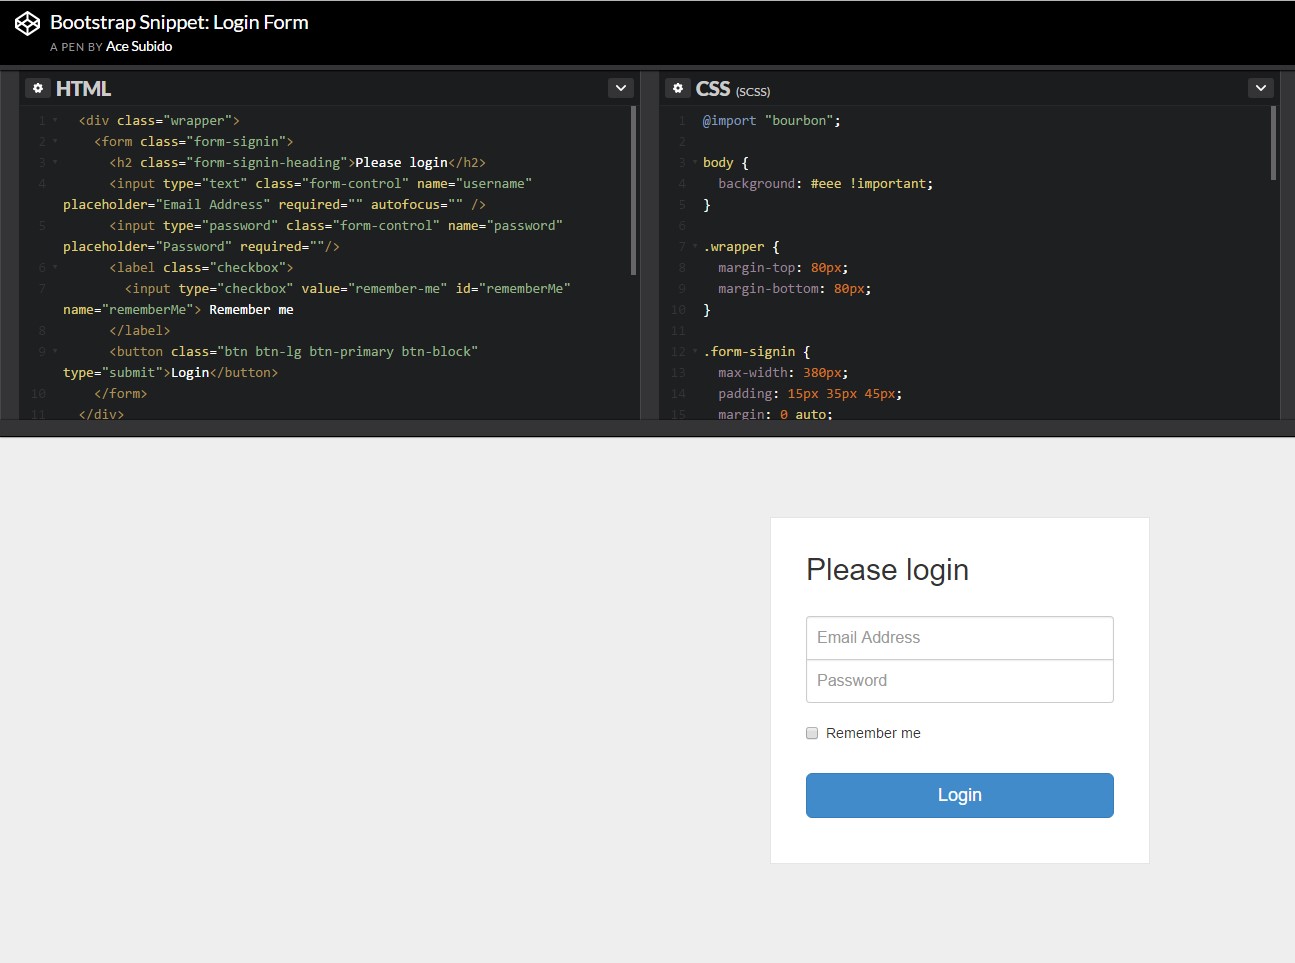  An additional example of Bootstrap Login Form